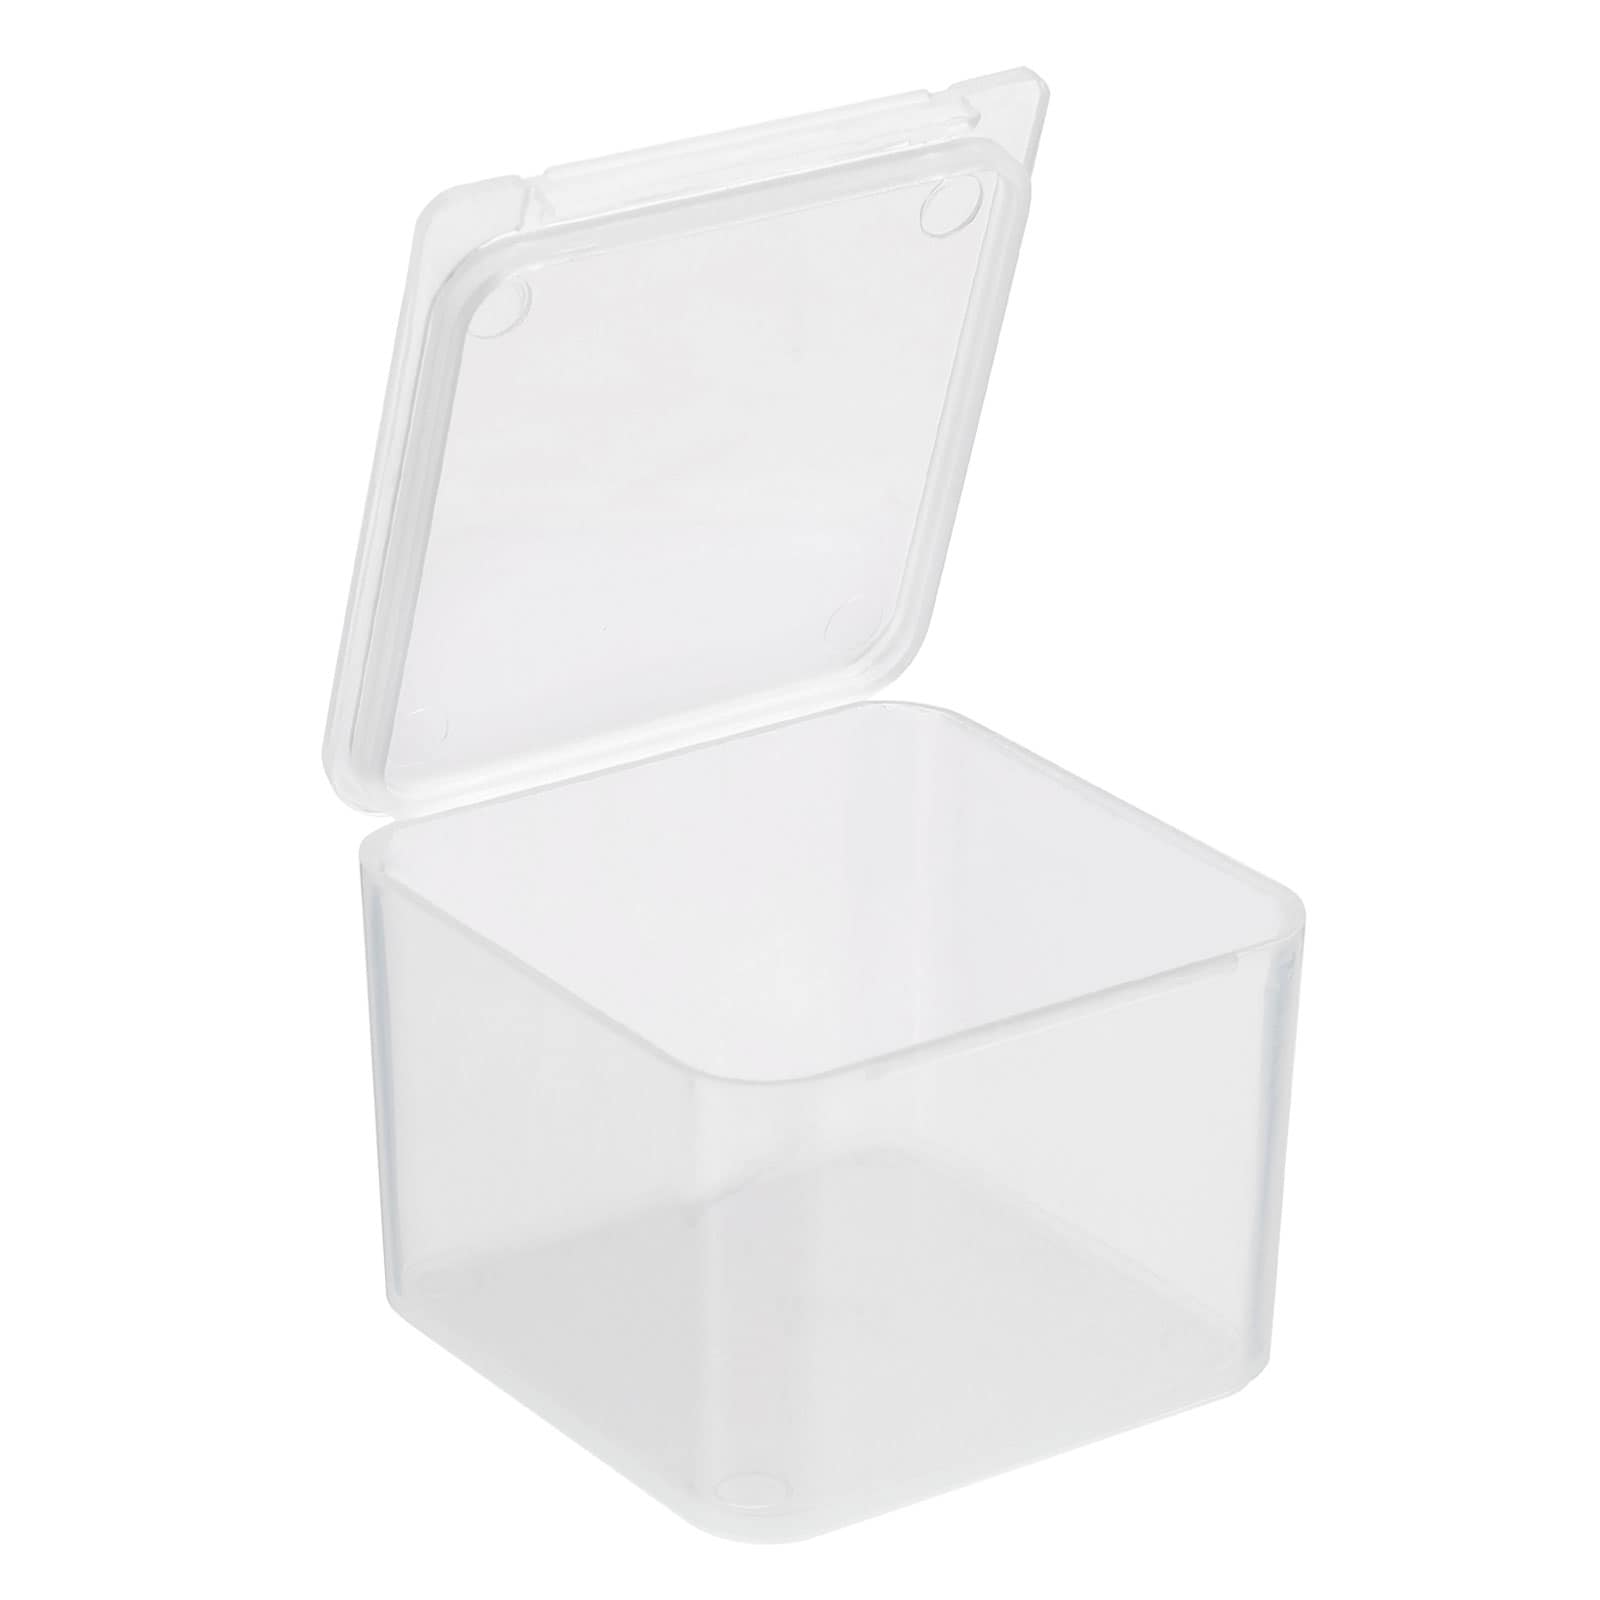 10-Piece Square Nestable Food Storage Containers – Rachael Ray